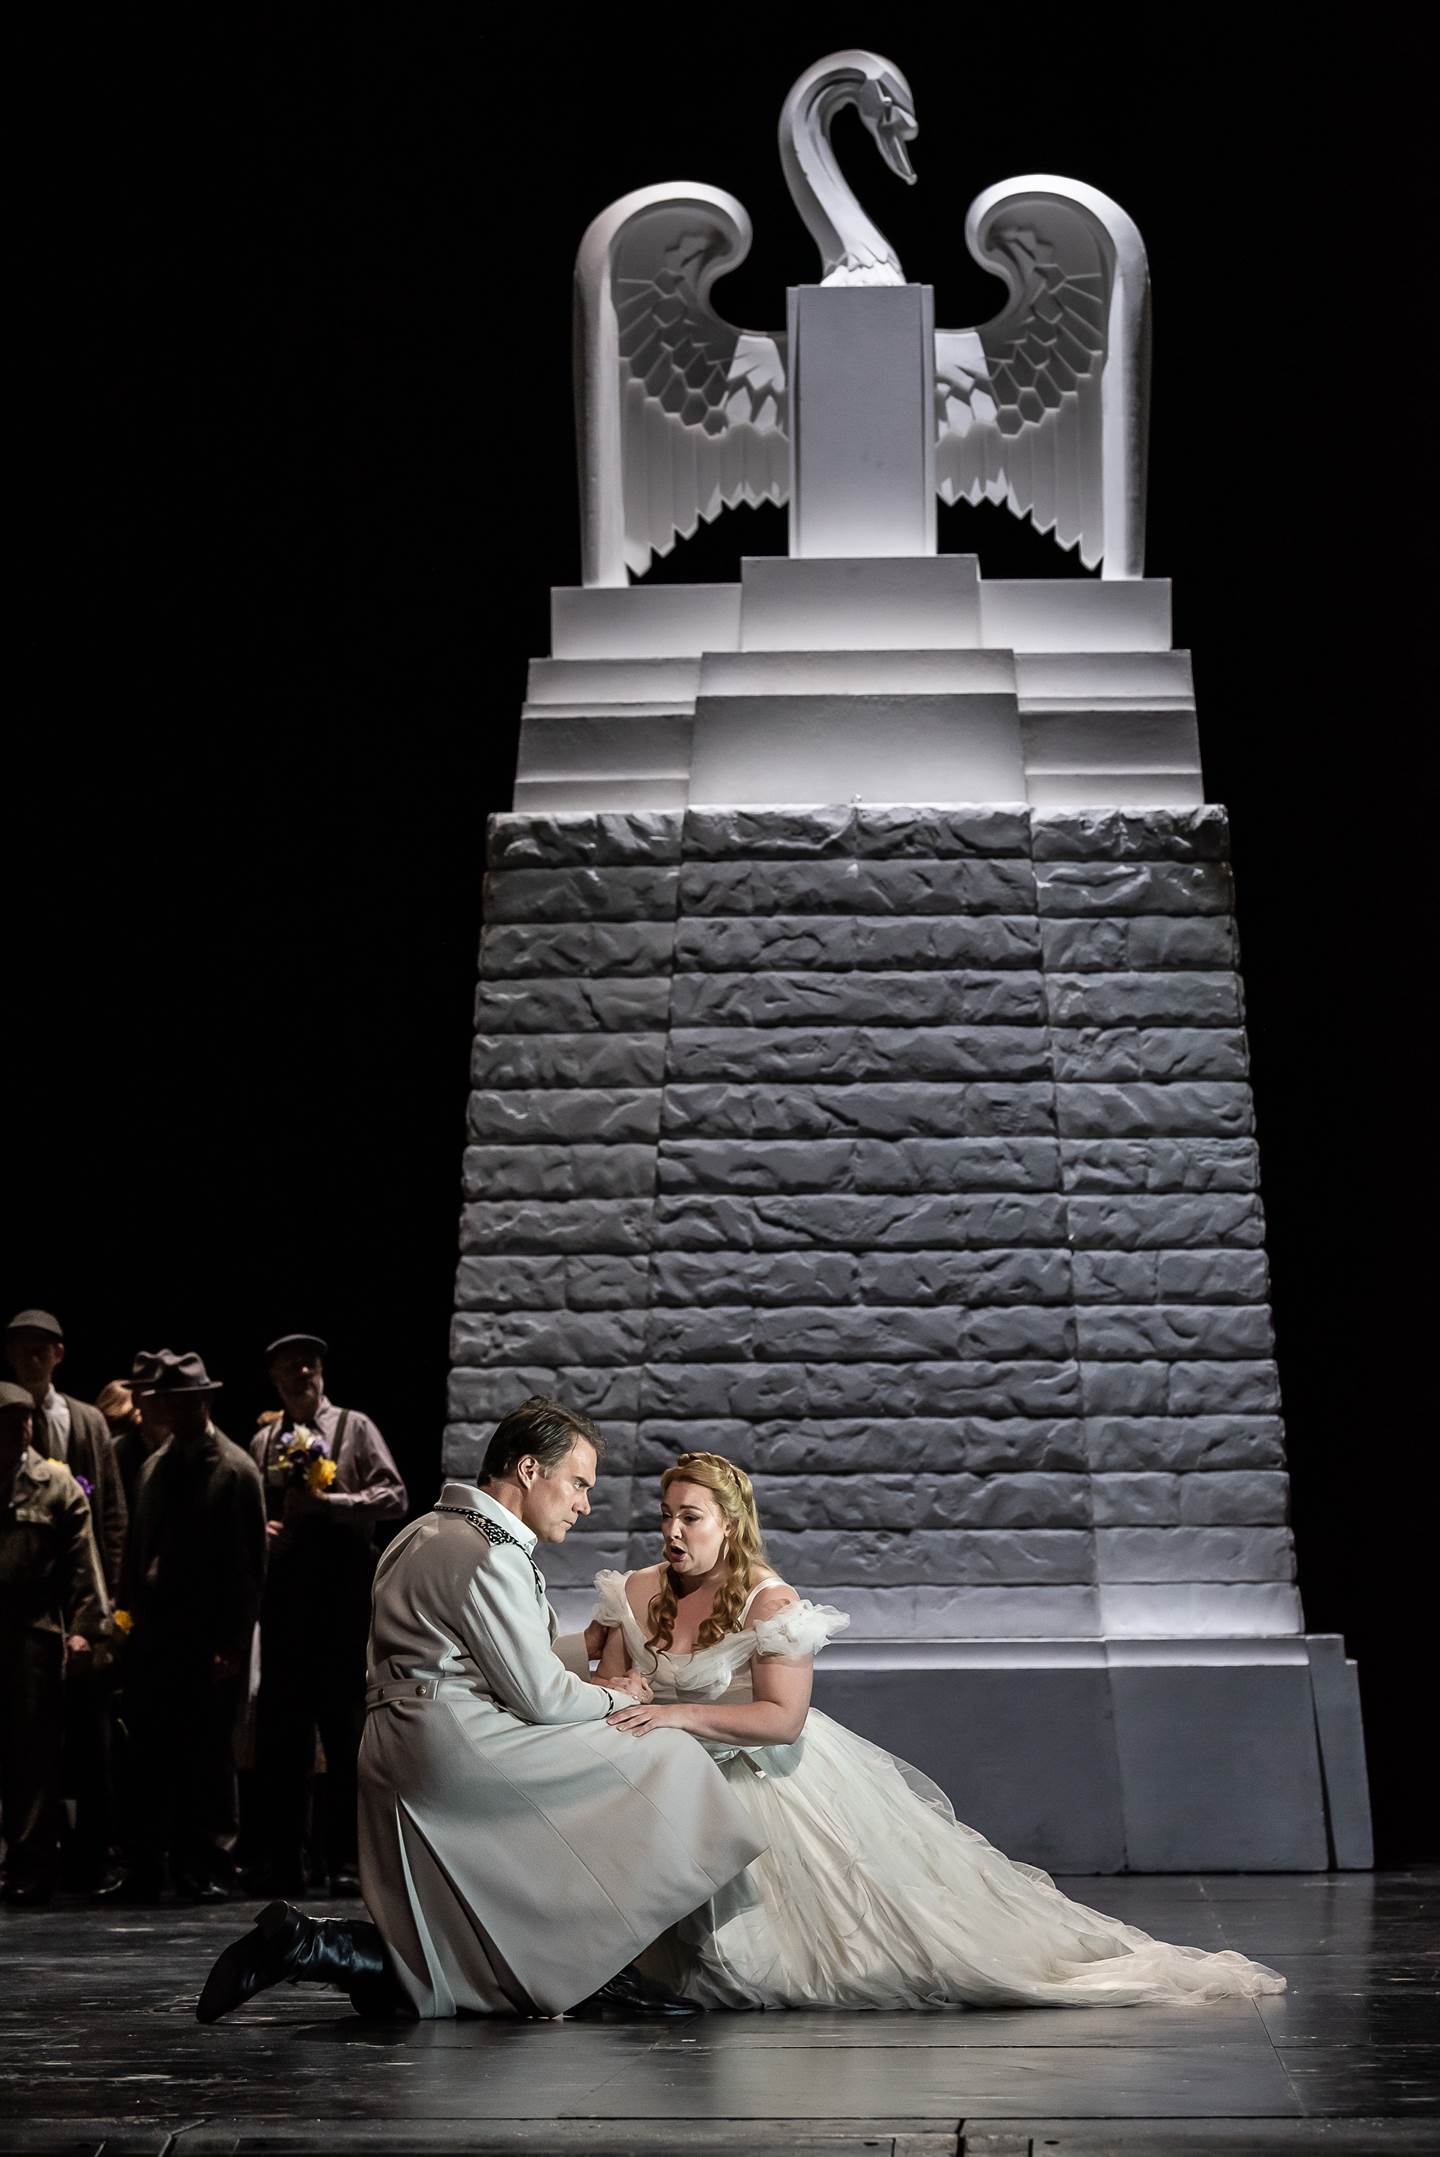 An image from the Royal Opera House’s production of Lohengrin